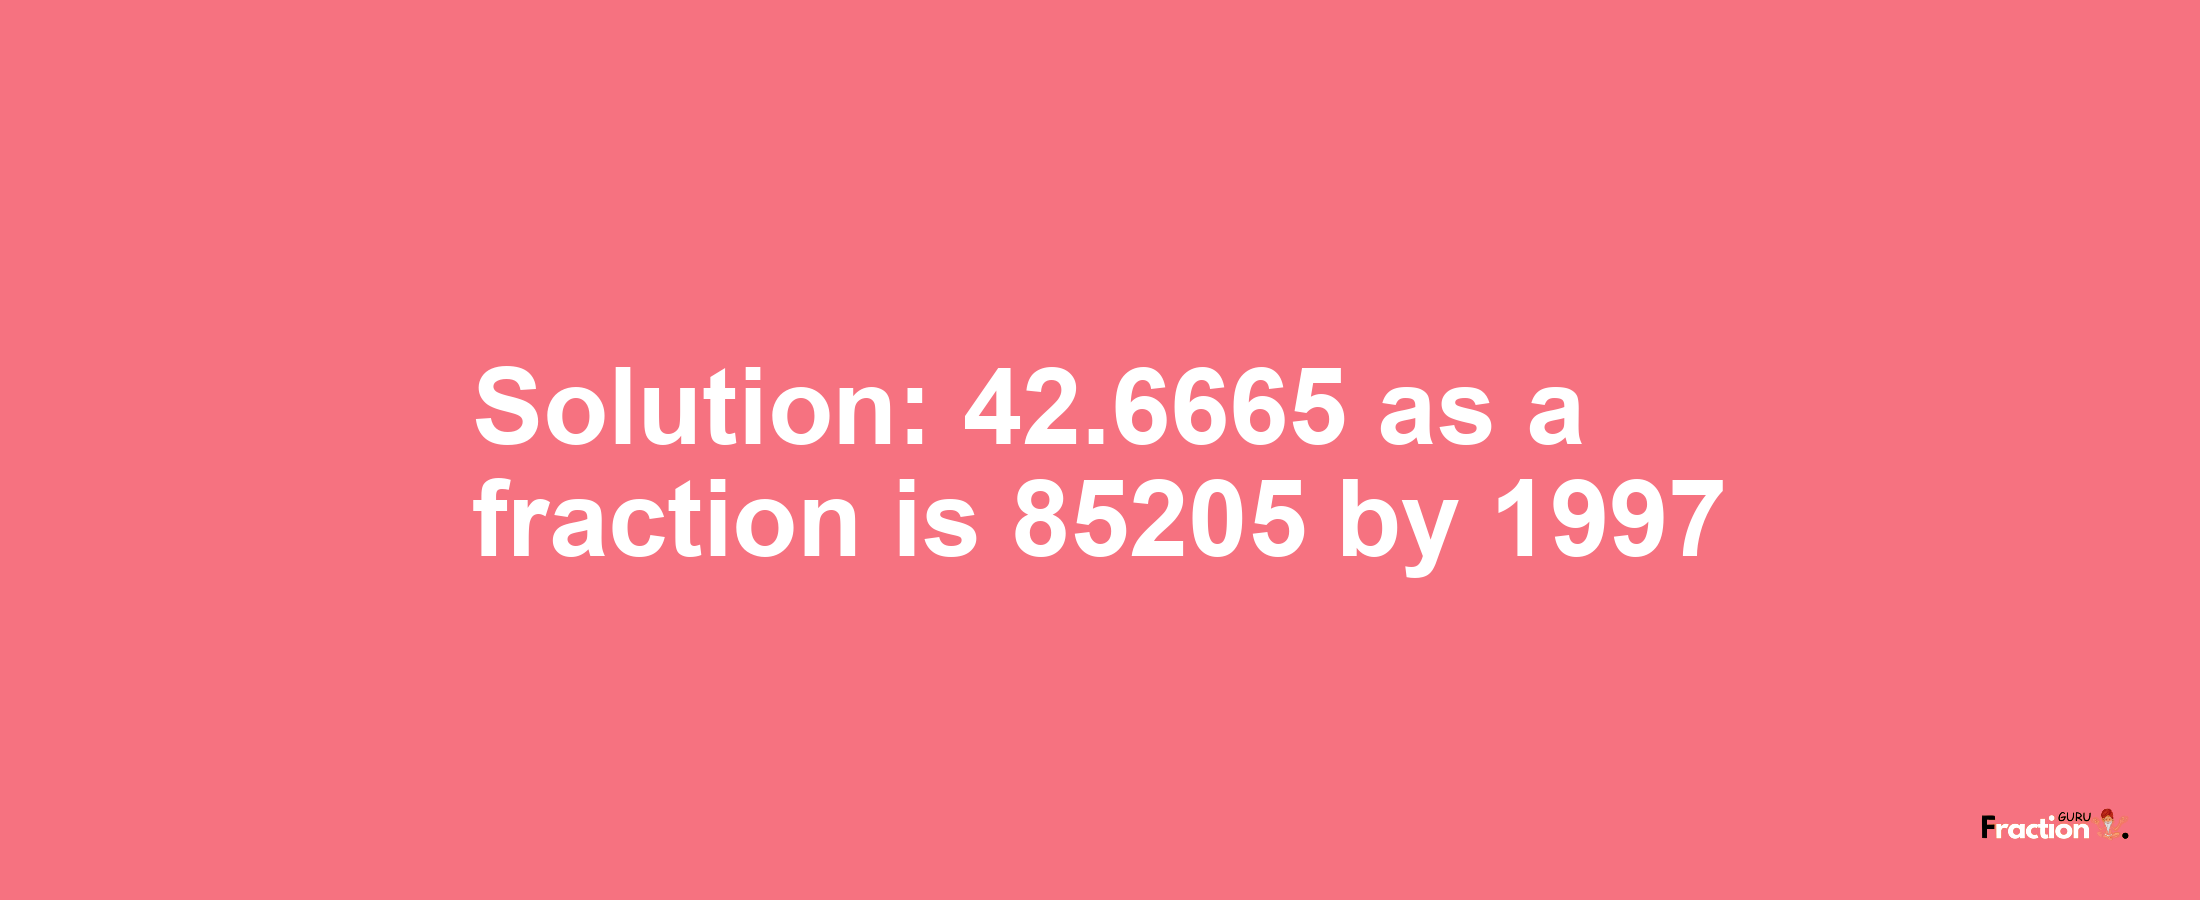 Solution:42.6665 as a fraction is 85205/1997